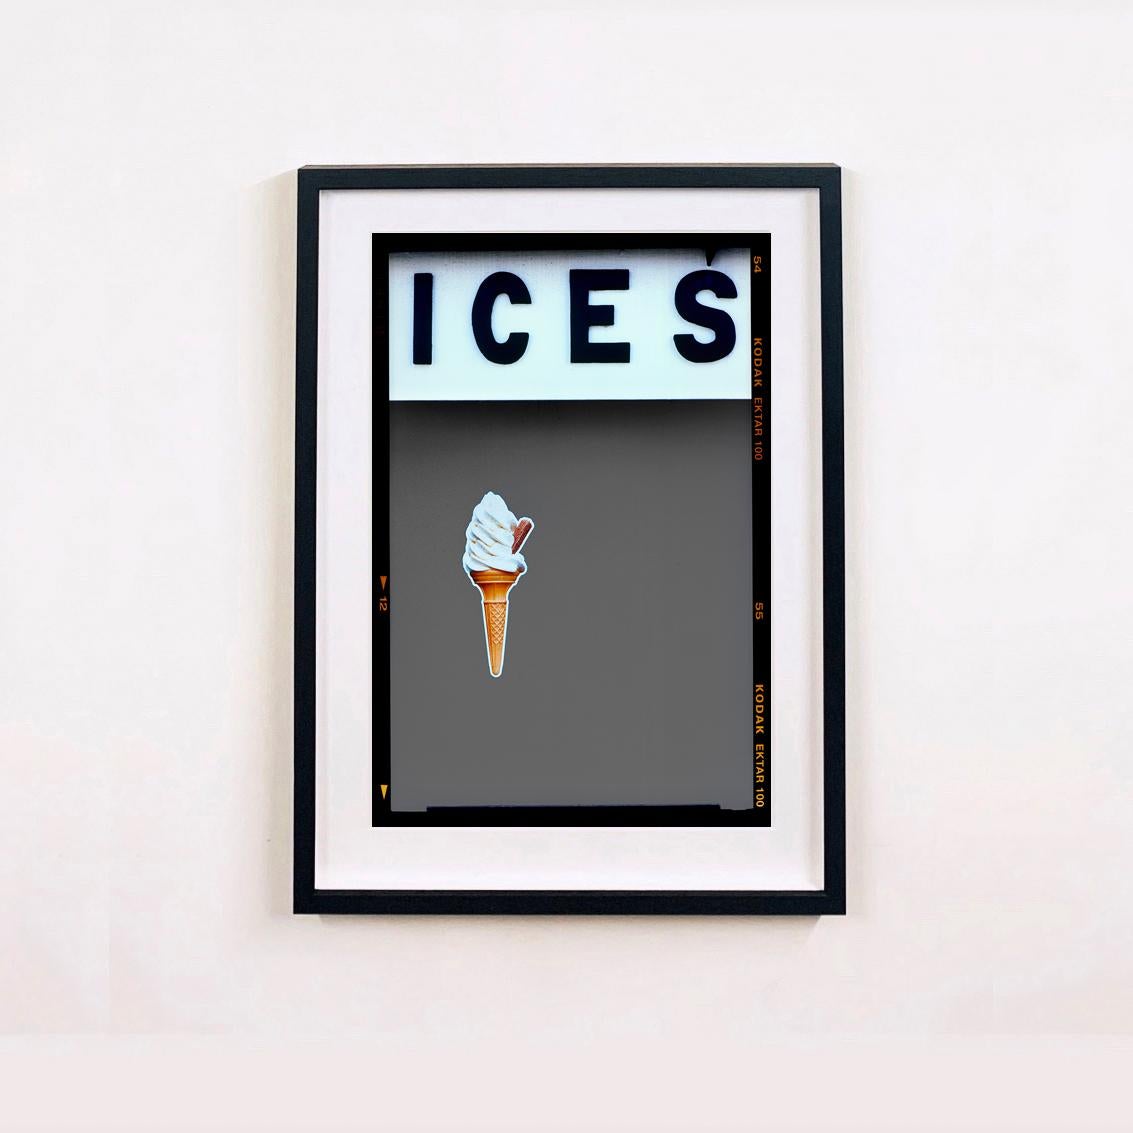 Ices (Grey), Bexhill-on-Sea - British seaside color photography - Photograph by Richard Heeps